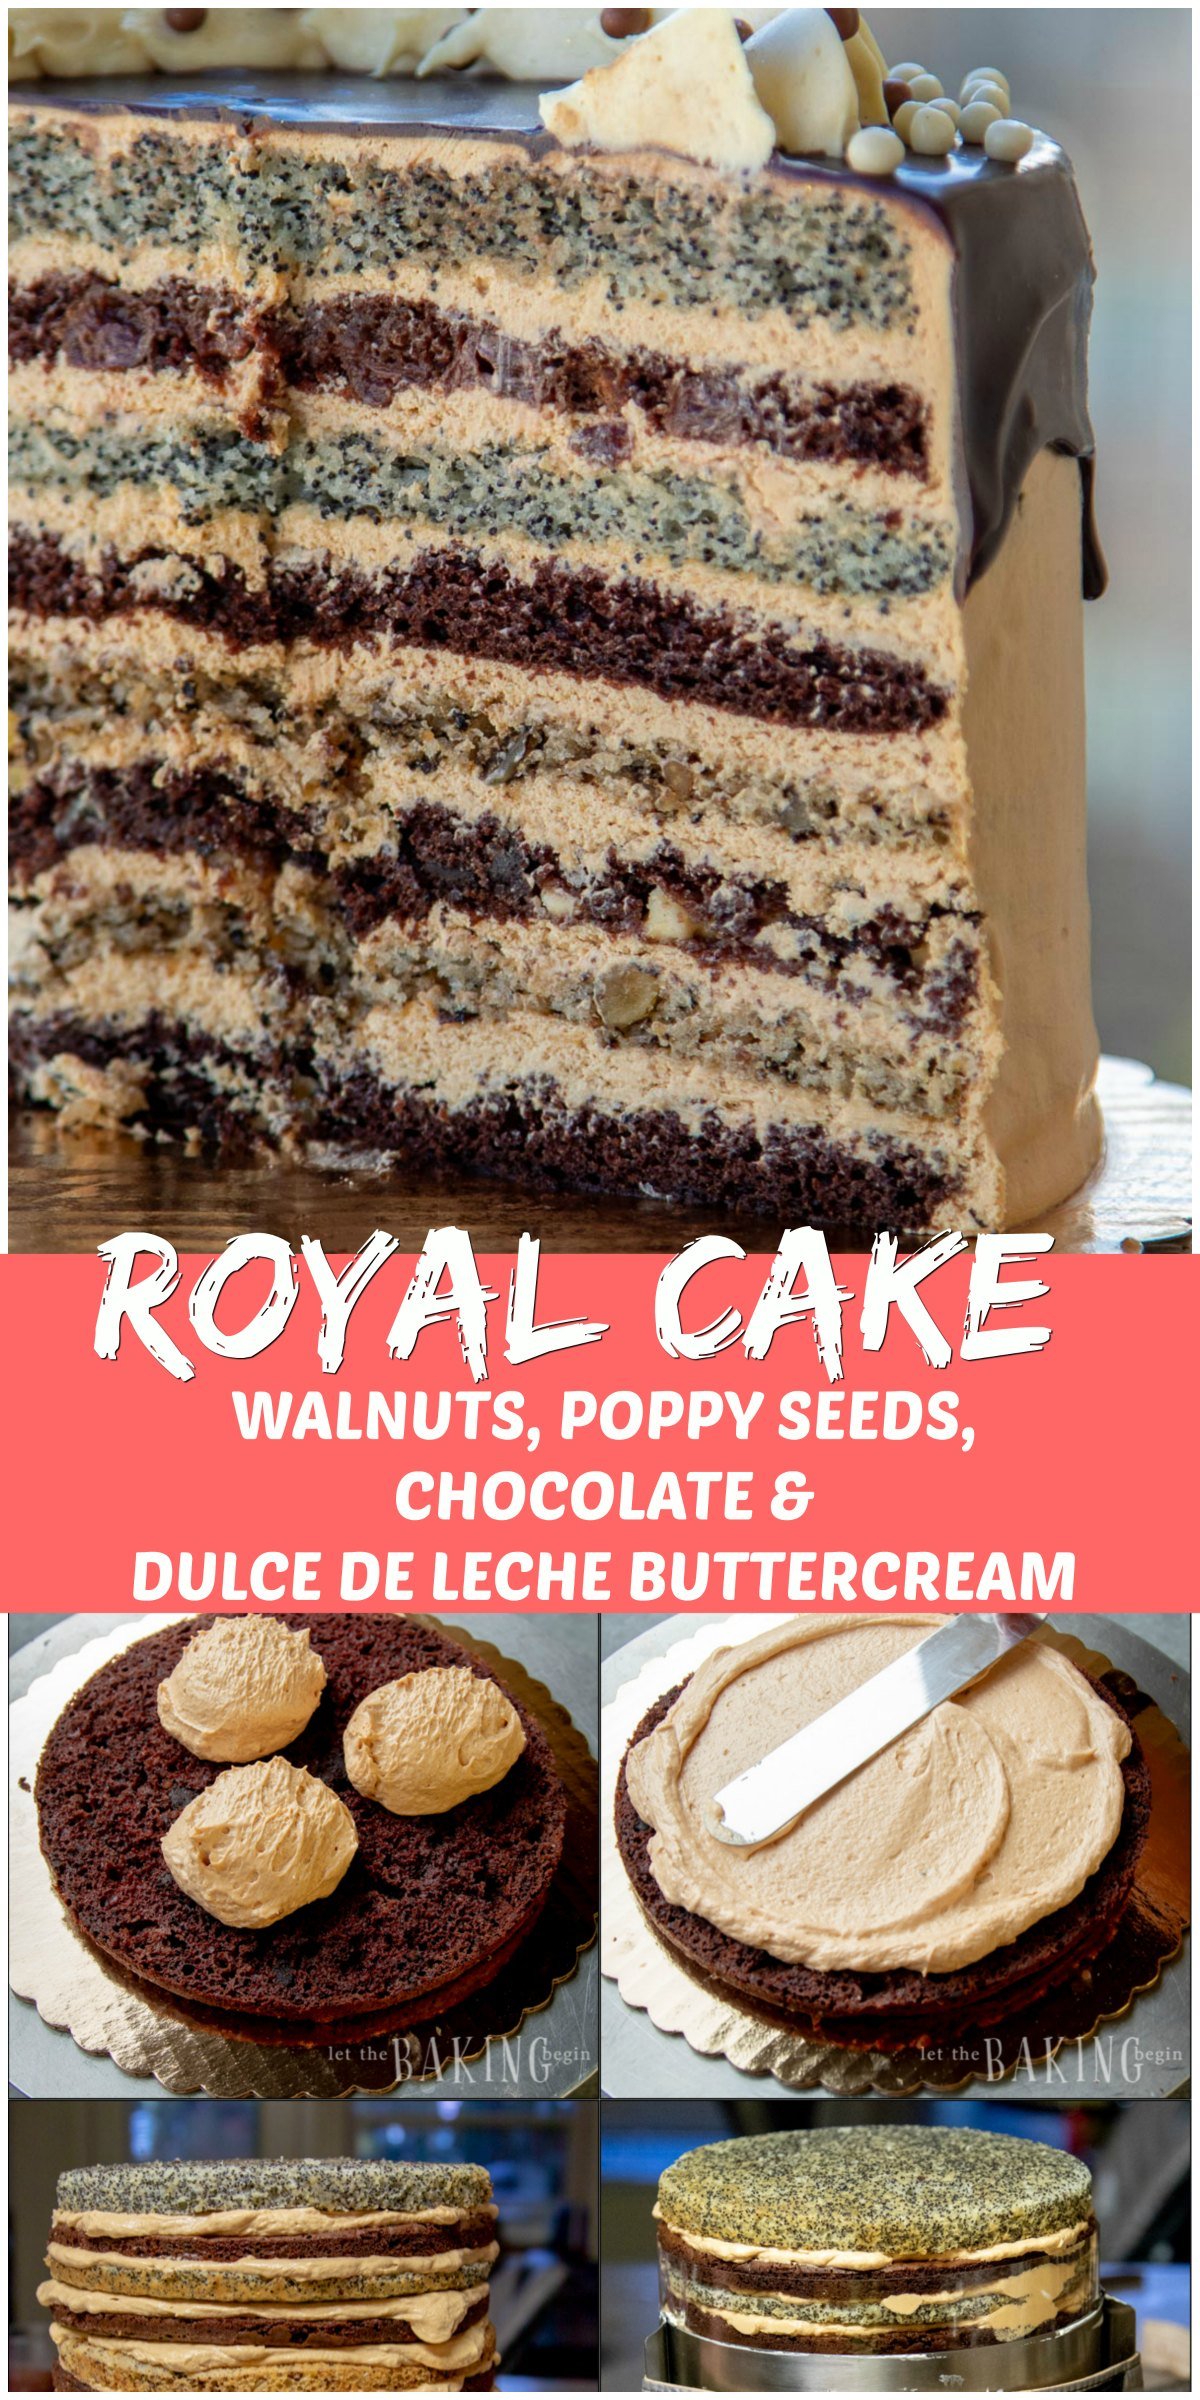 Russian Royal Cake (Korolevskiy Cake)- Layers of walnut, poppyseed, cherry and chocolate cakes frosted with Dulce De Leche Buttercream and drizzled with chocolate.